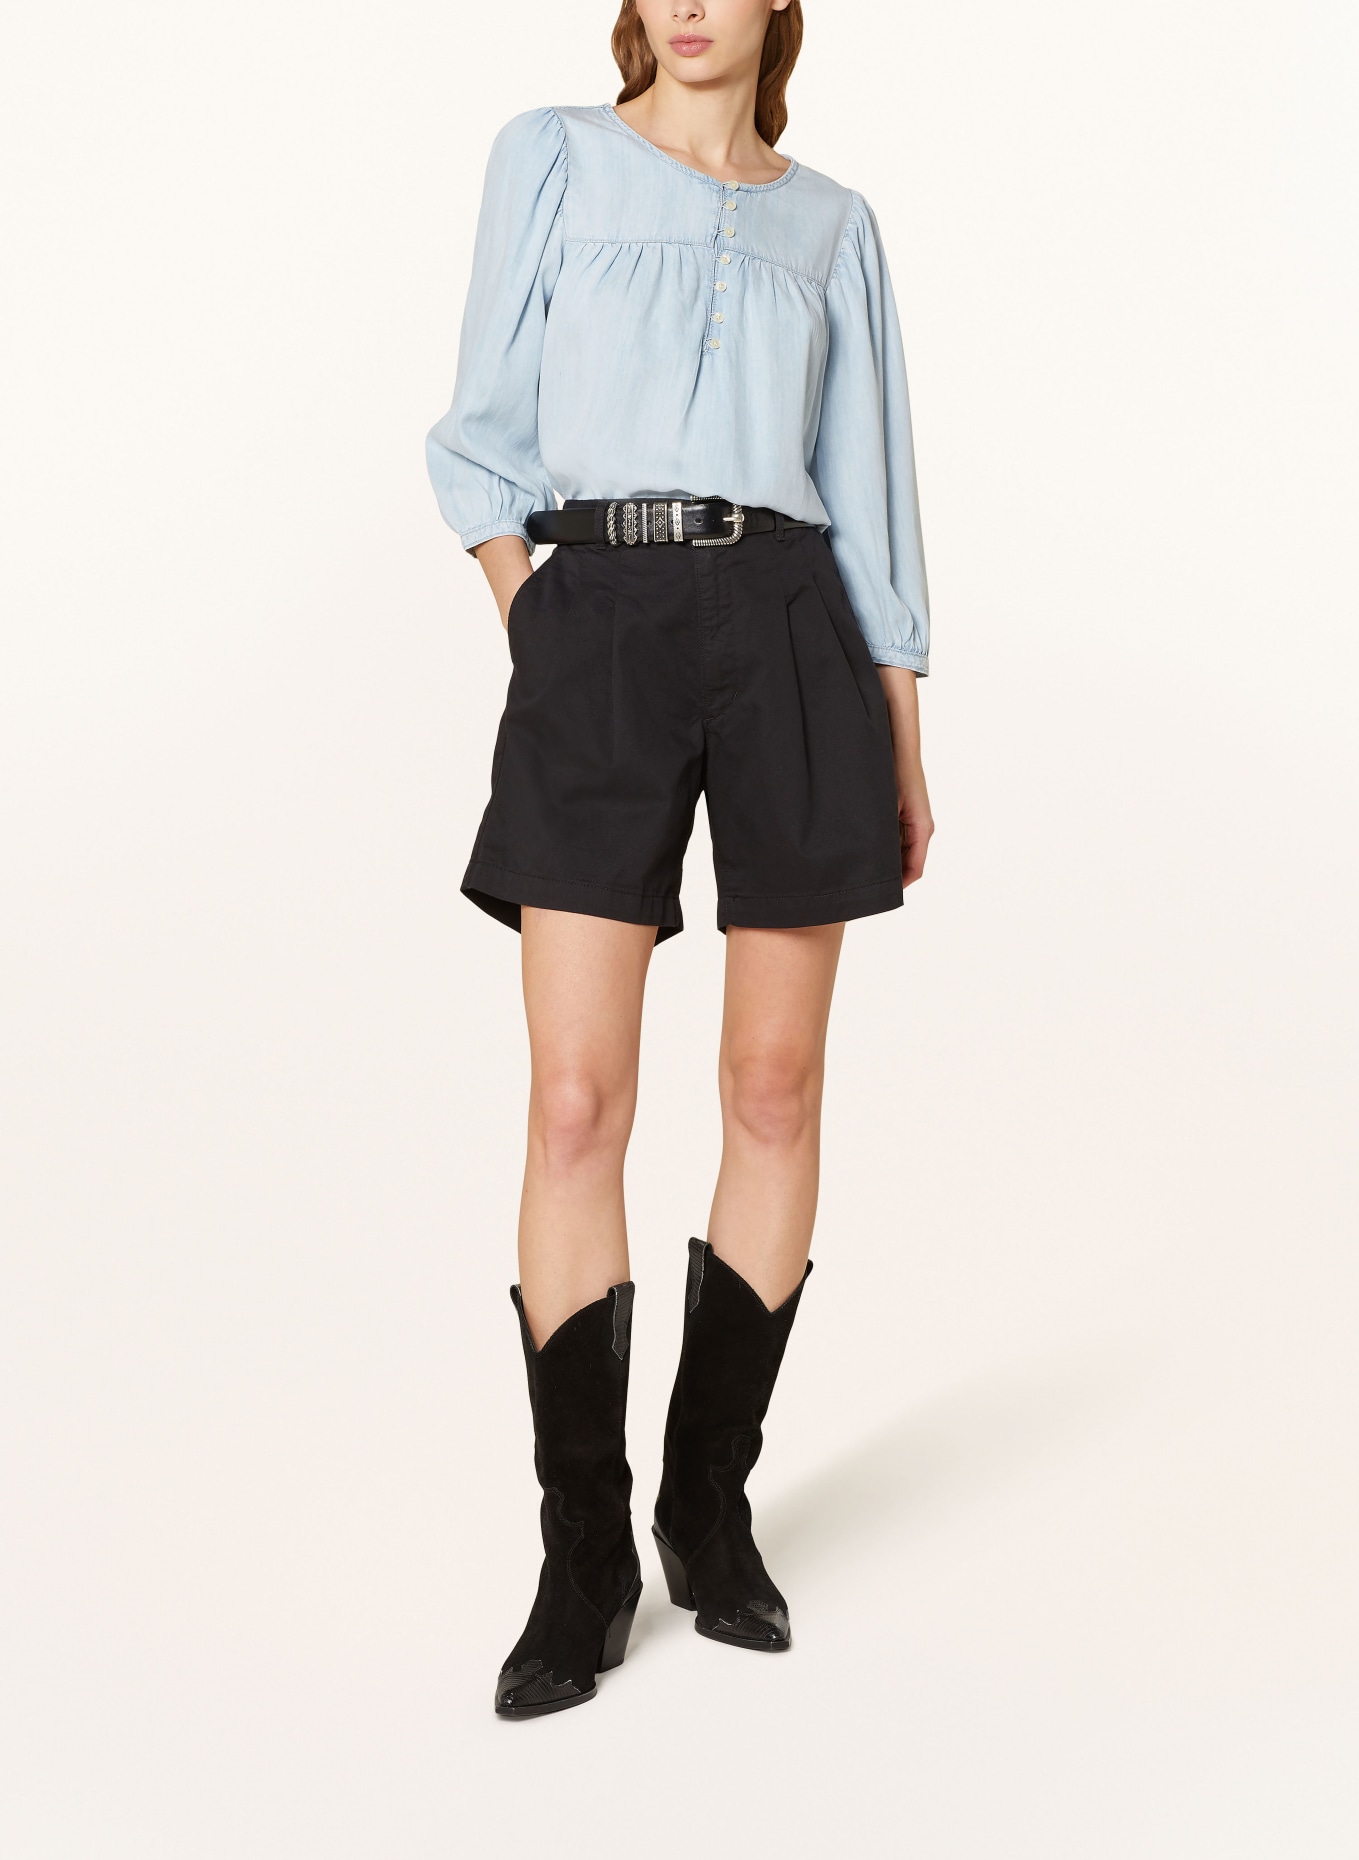 Levi's® Shirt blouse HALSEY in denim look with 3/4 sleeve, Color: LIGHT BLUE (Image 2)